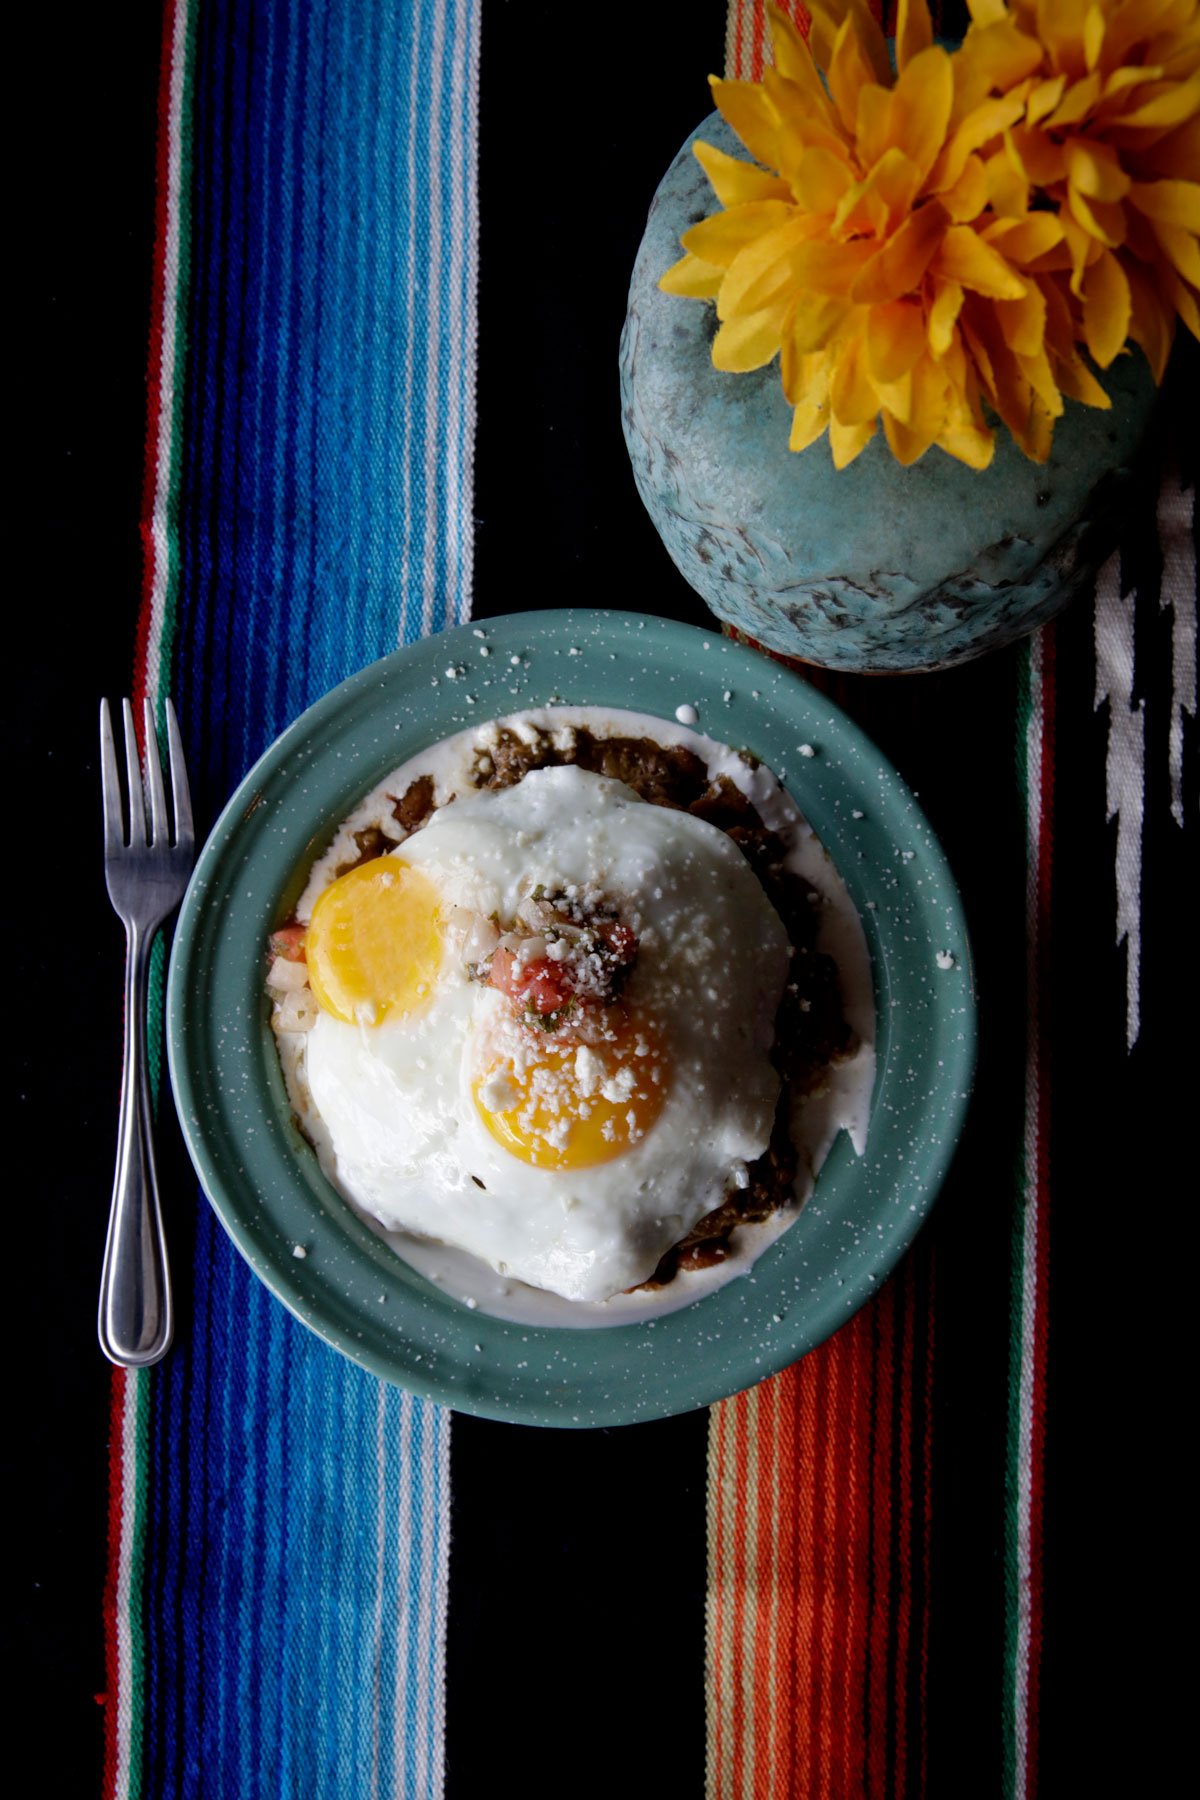 Mexi-Loco Moco with green chili, tender pork over a bed of rice with cream, 2 eggs, sprinkled with quest fresco. Photo: Olivier Koning